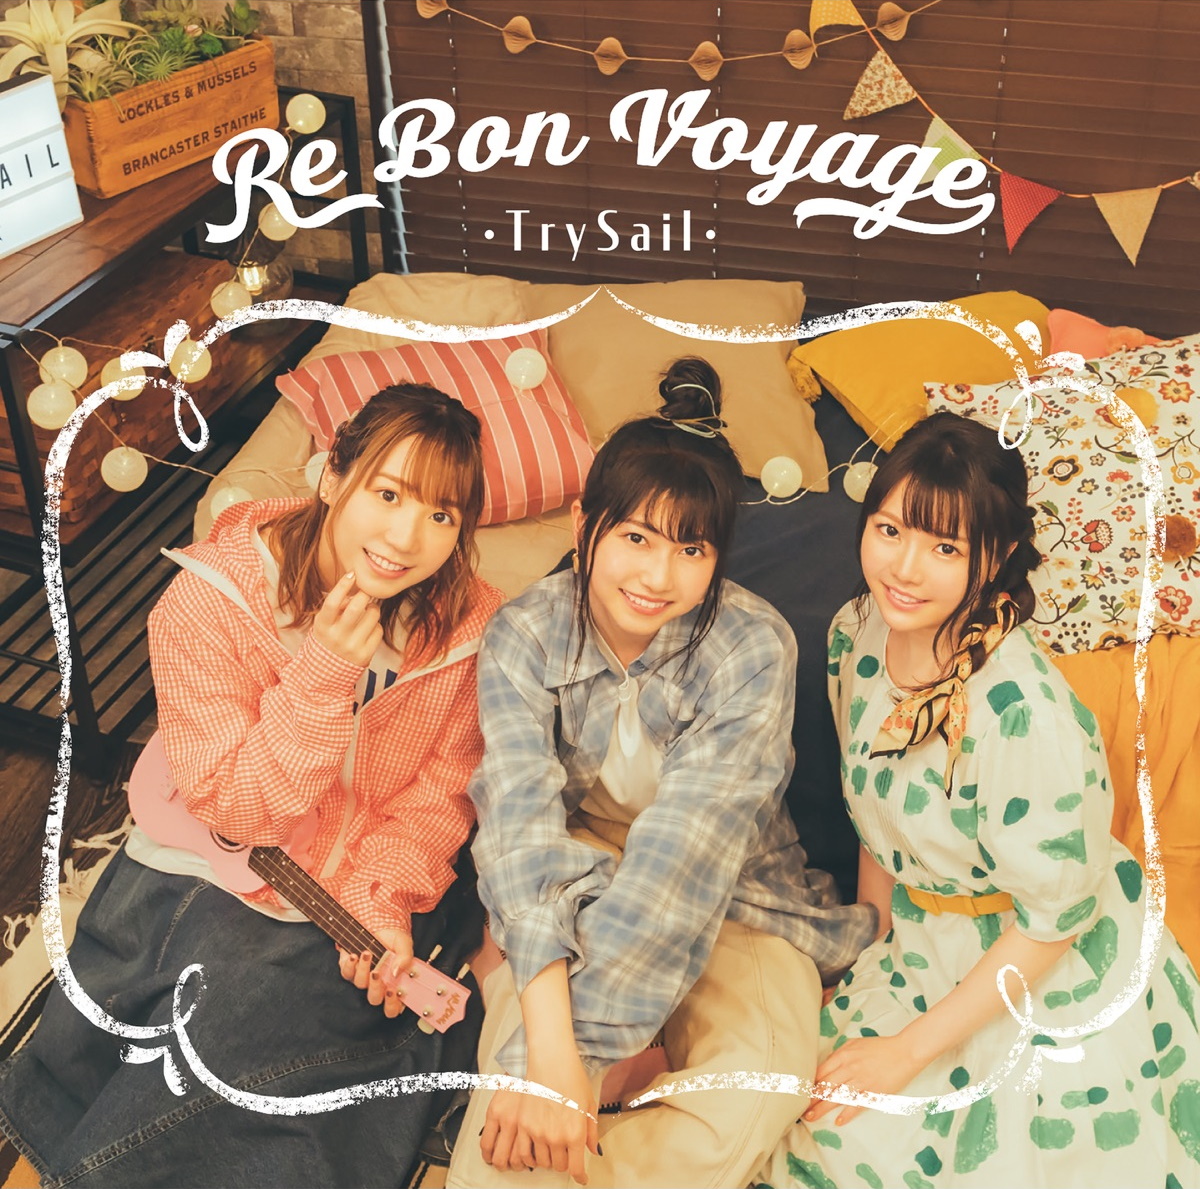 Cover for『TrySail - Monaural』from the release『Re Bon Voyage』